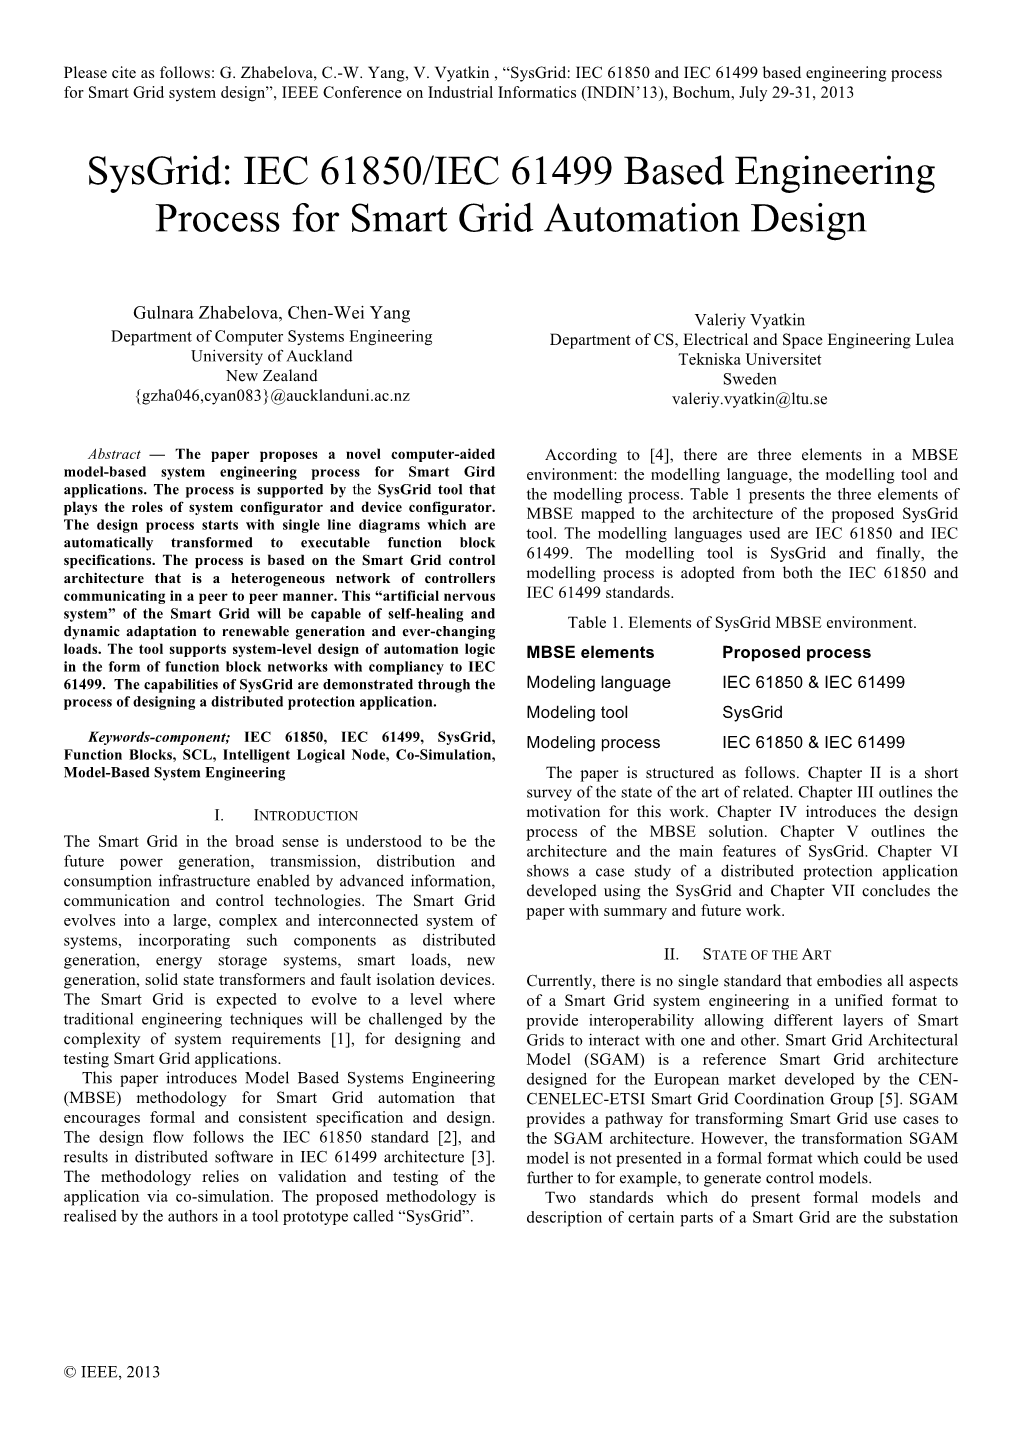 Sysgrid: IEC 61850/IEC 61499 Based Engineering Process for Smart Grid Automation Design